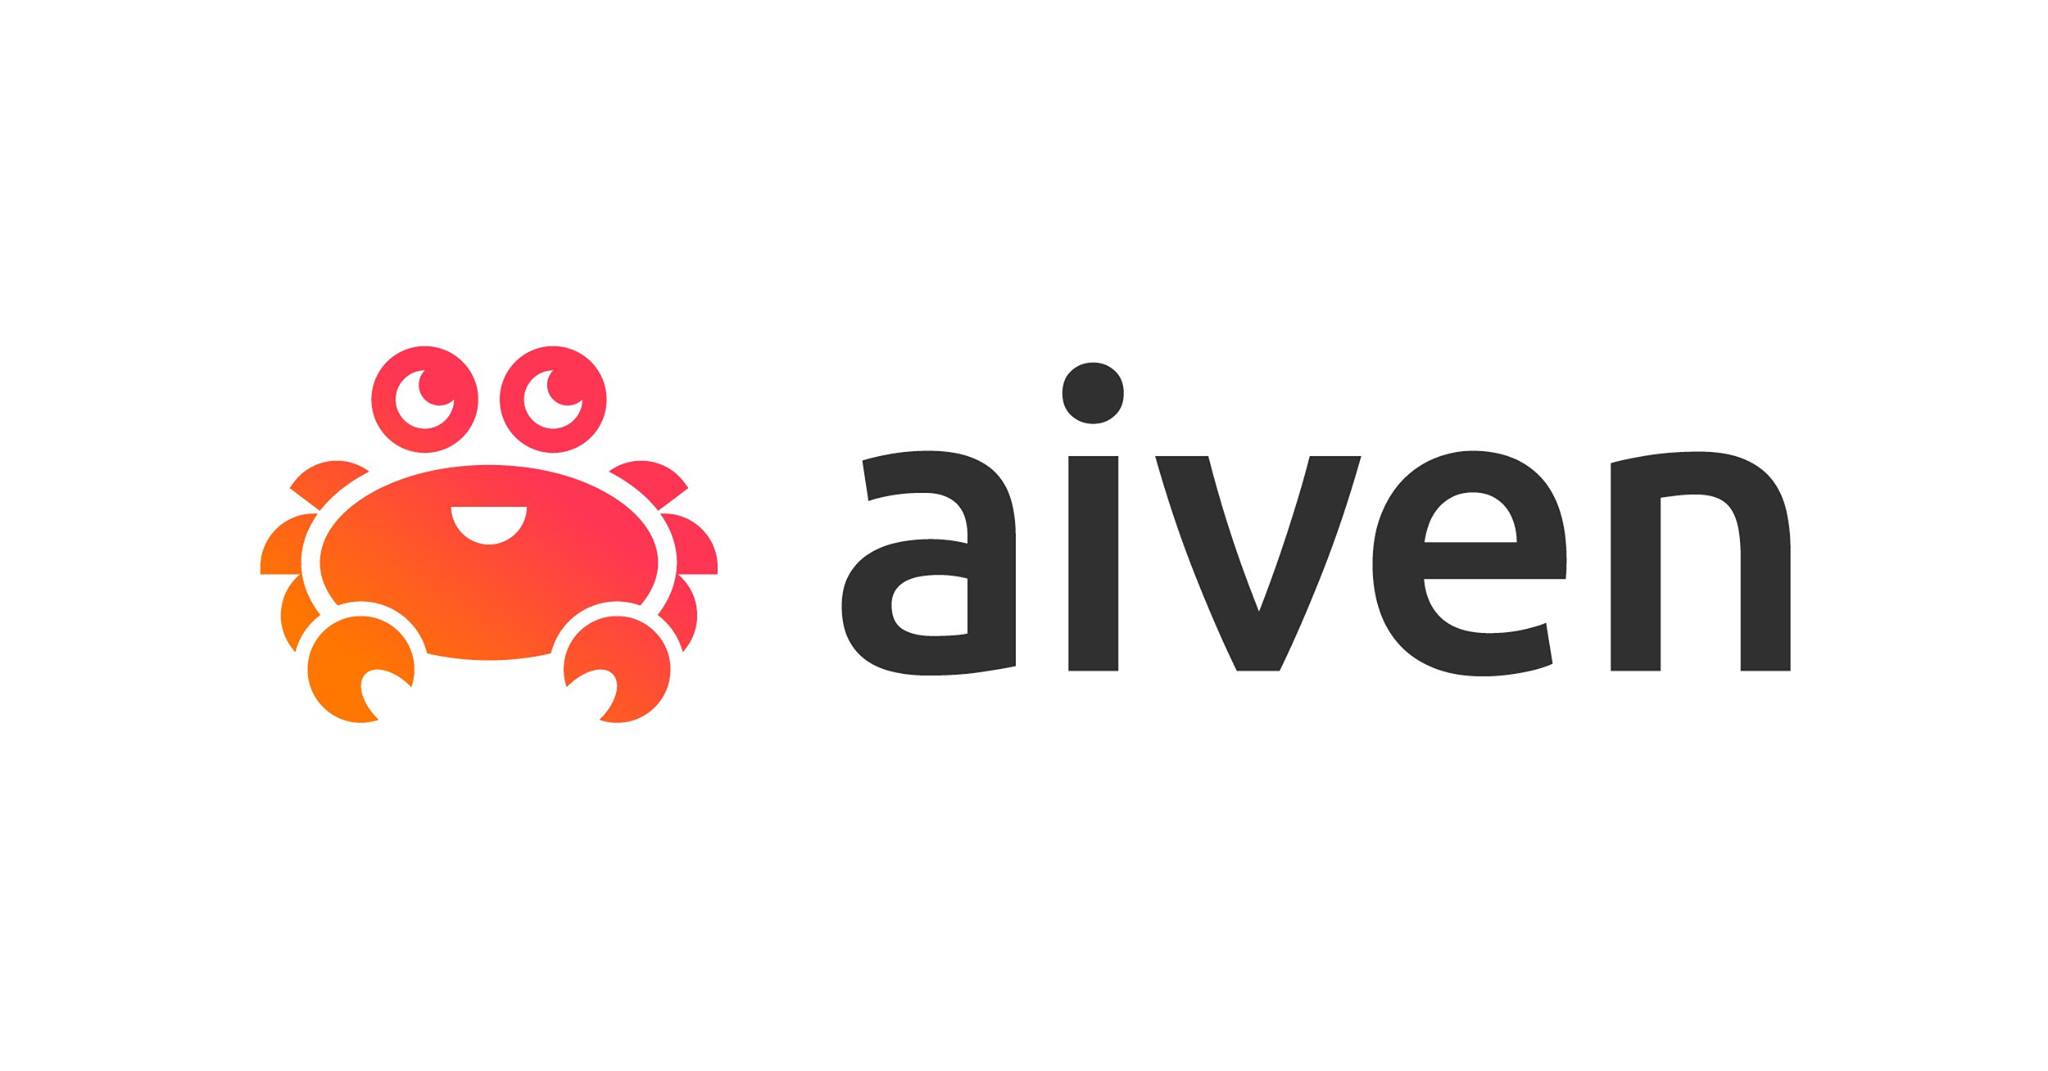 Aiven raises $210M in Series D funding to expand its open-source expertise